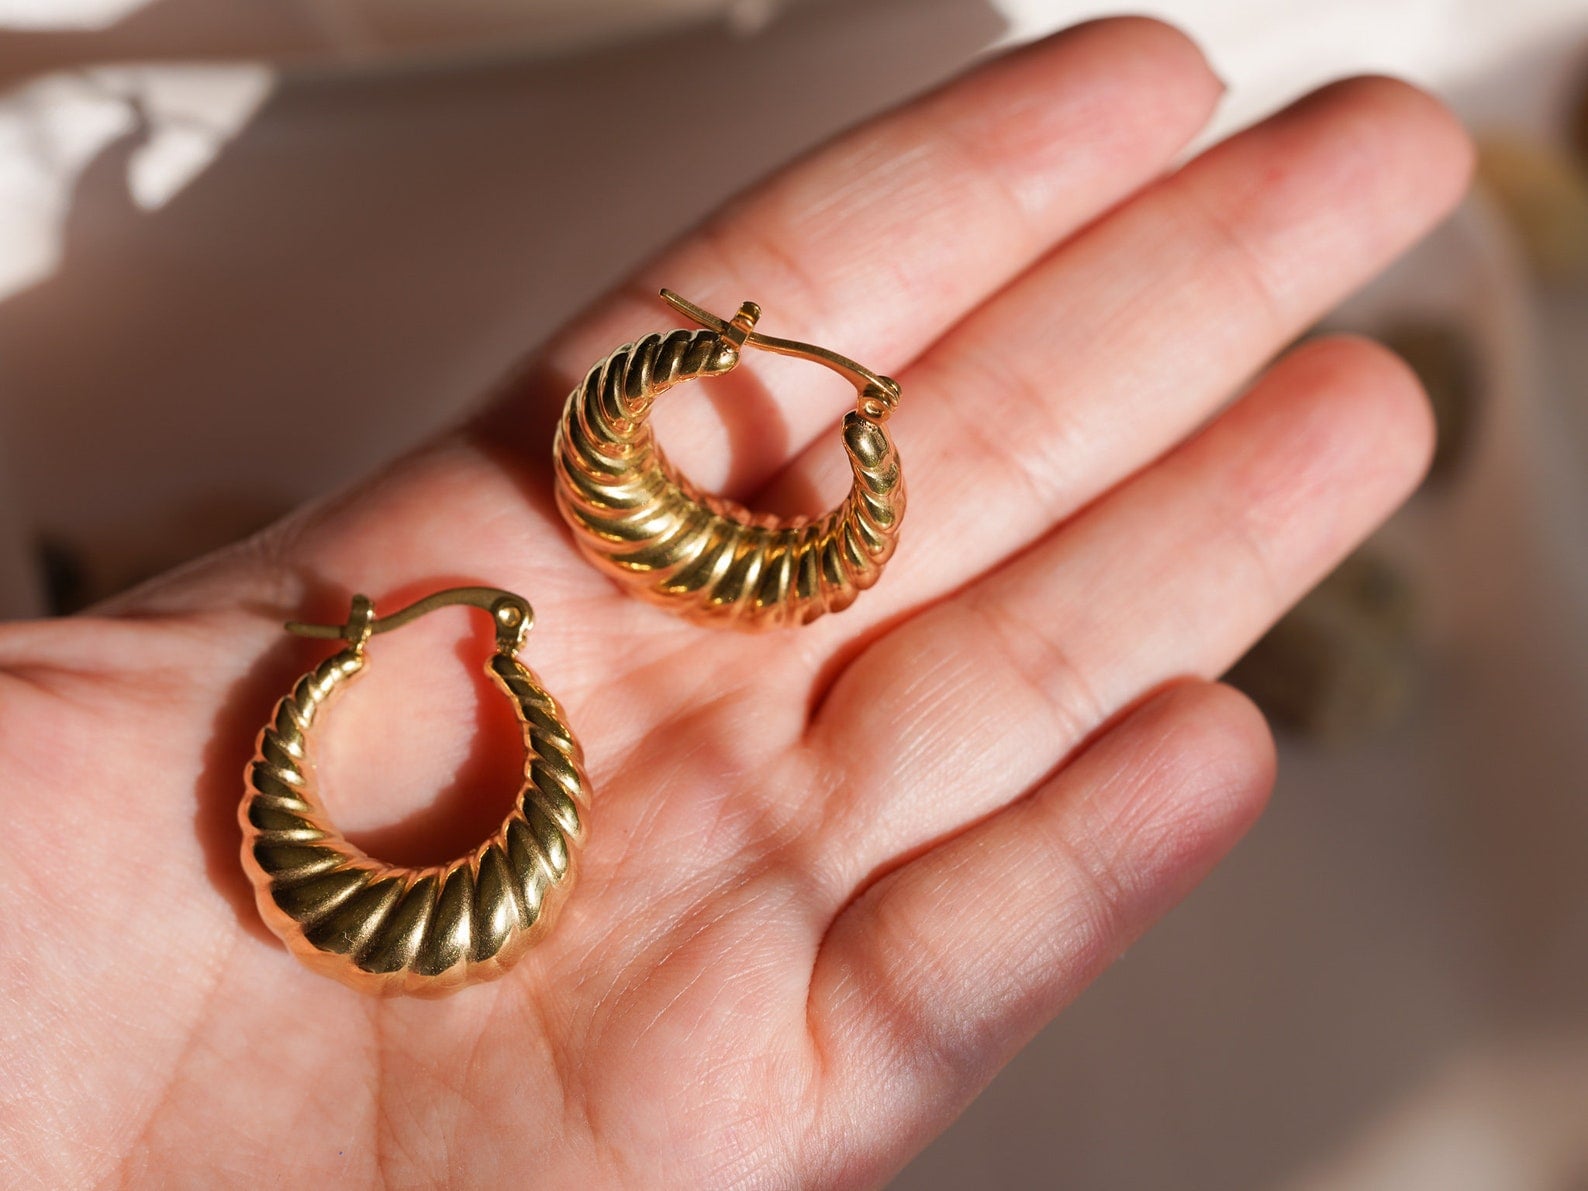 30 Earrings Under $20 to Make a Statement